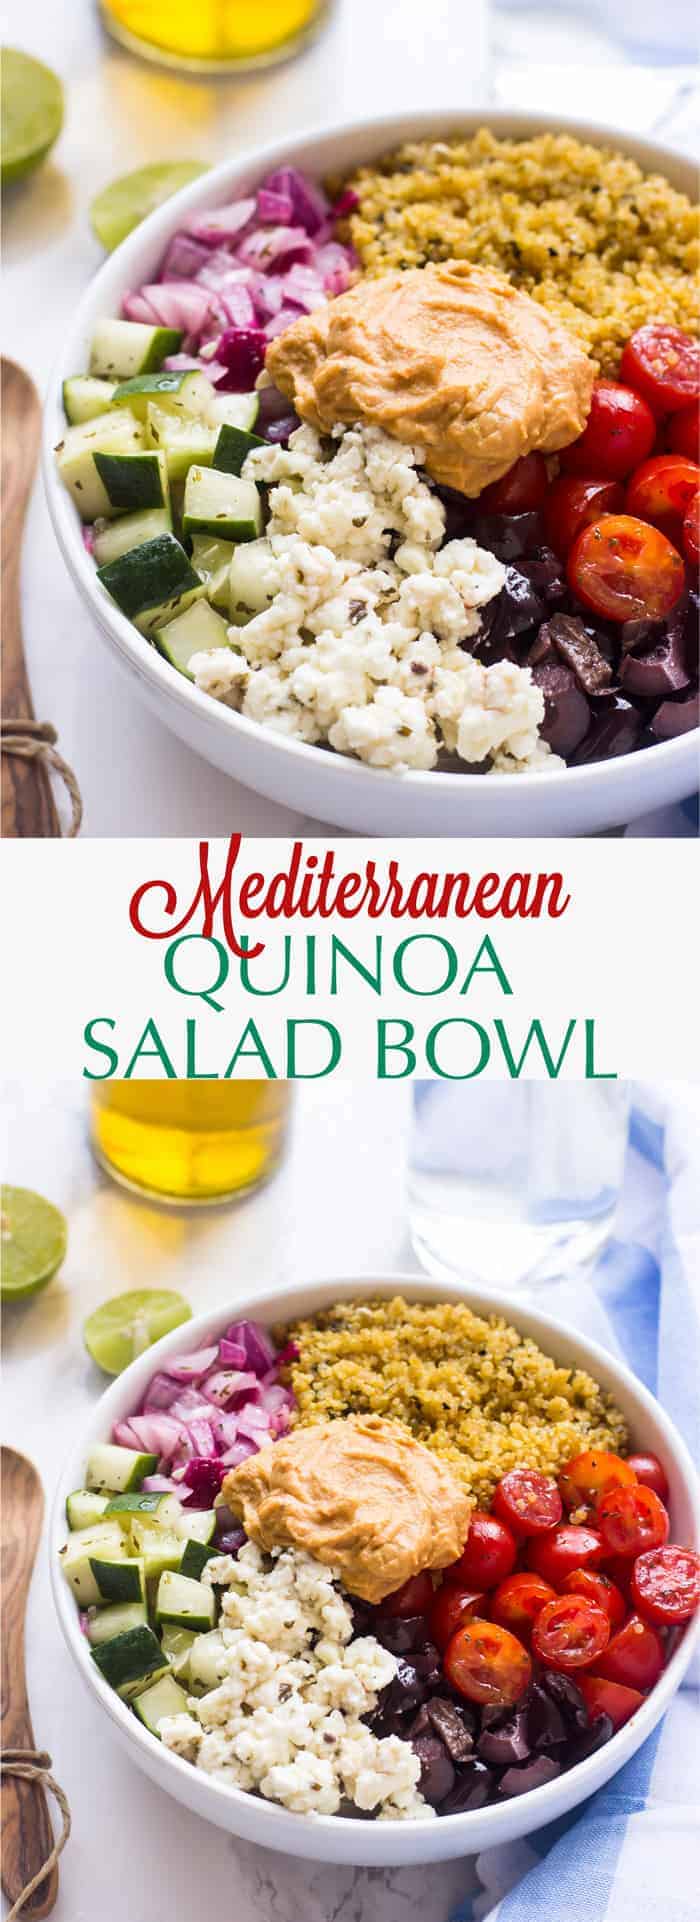 This Mediterranean Quinoa Salad Bowl is loaded with delicious and filling veggies, topped with creamy hummus and comes together in just 20 minutes!